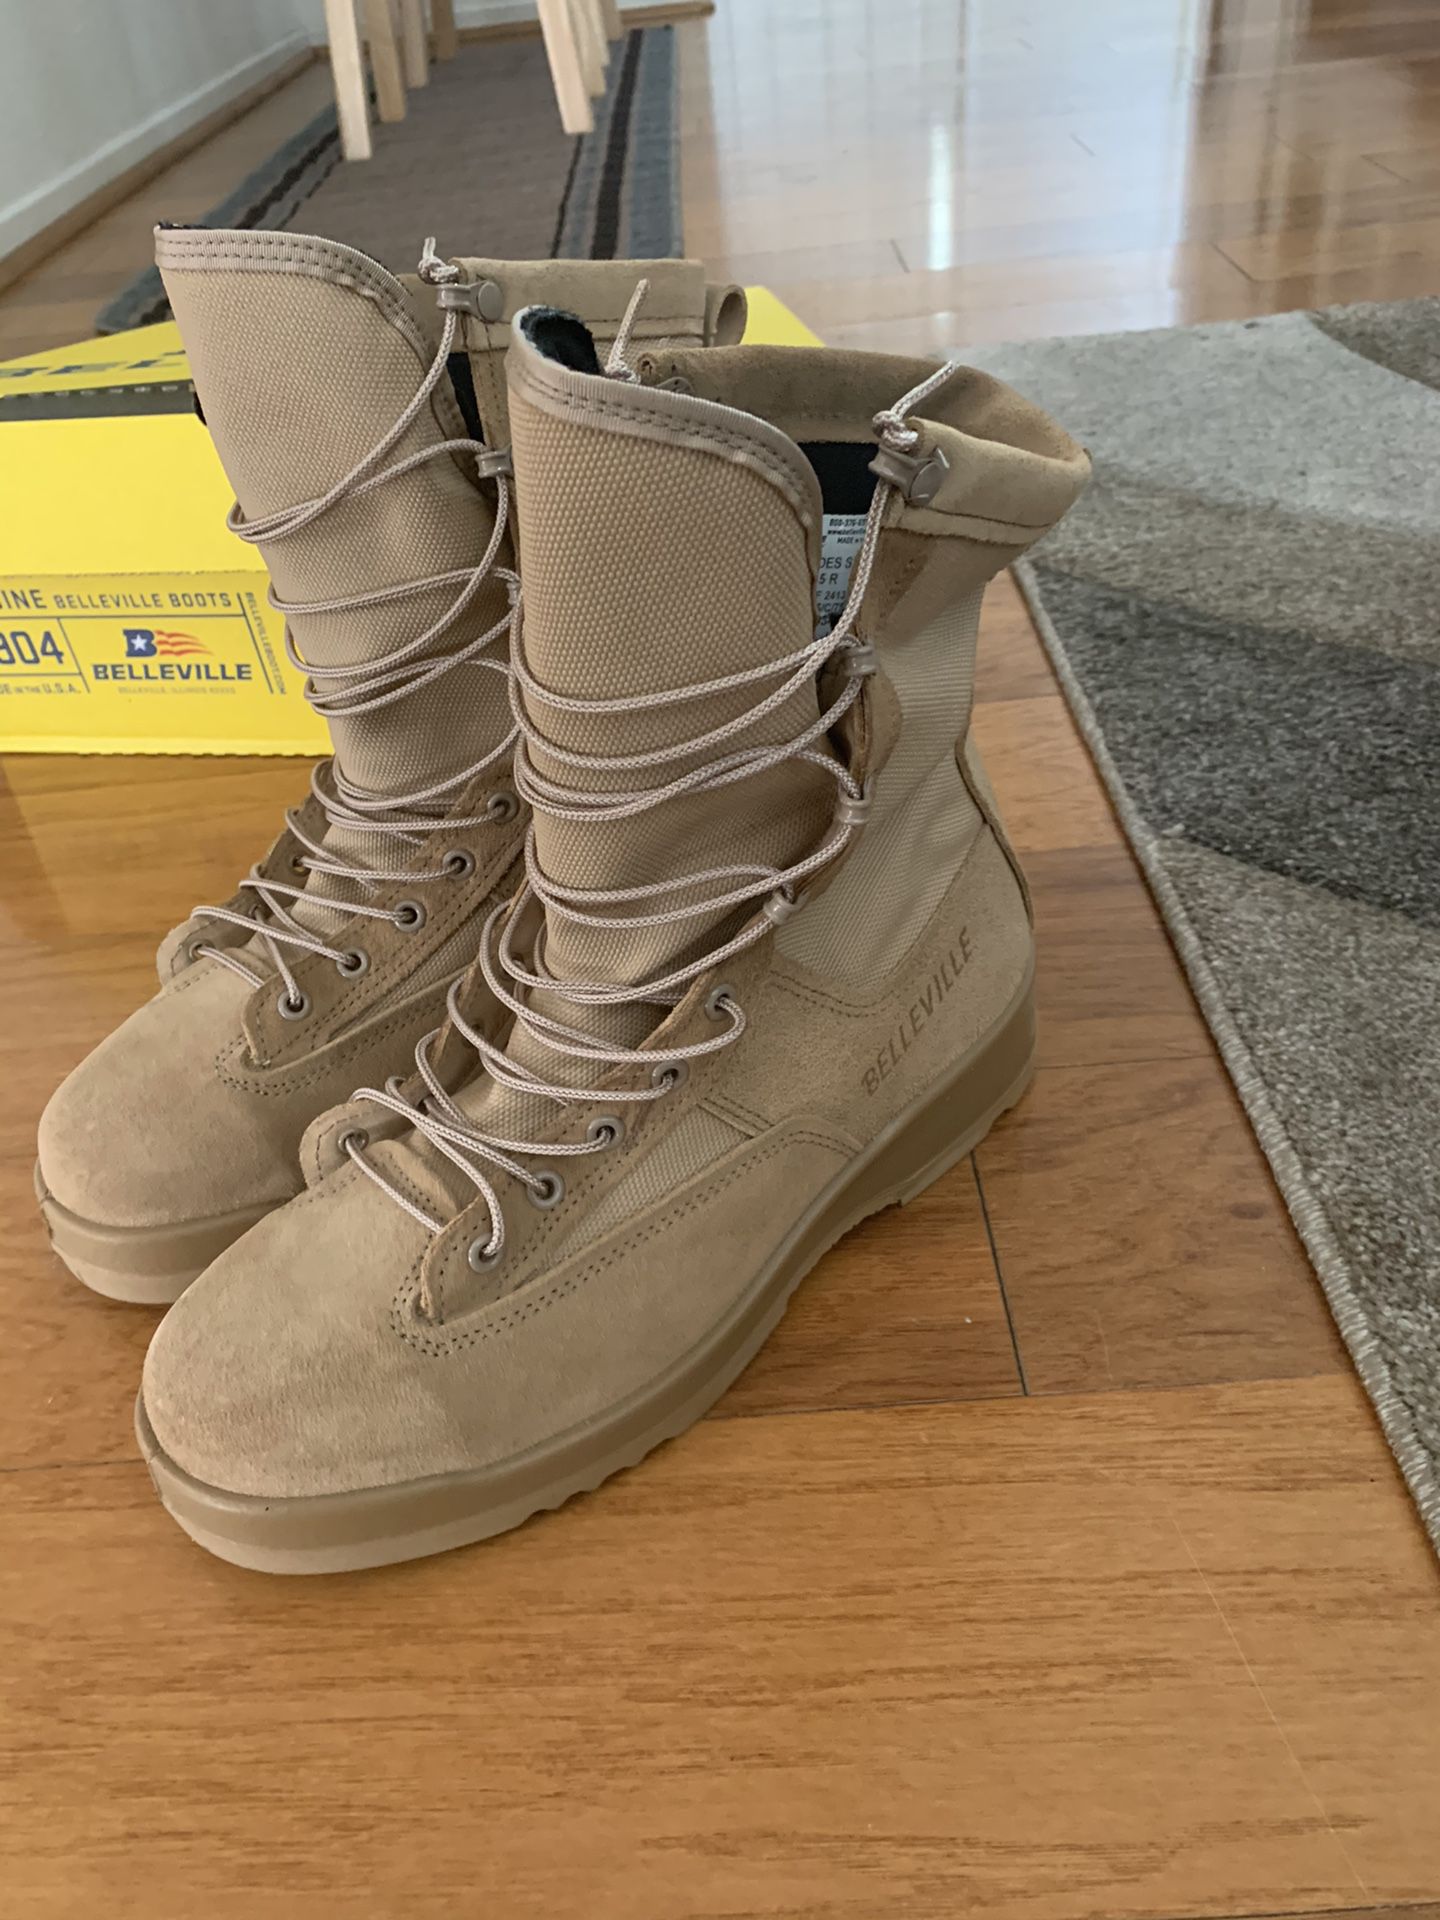 Belleville boots size 9.5 Brand new